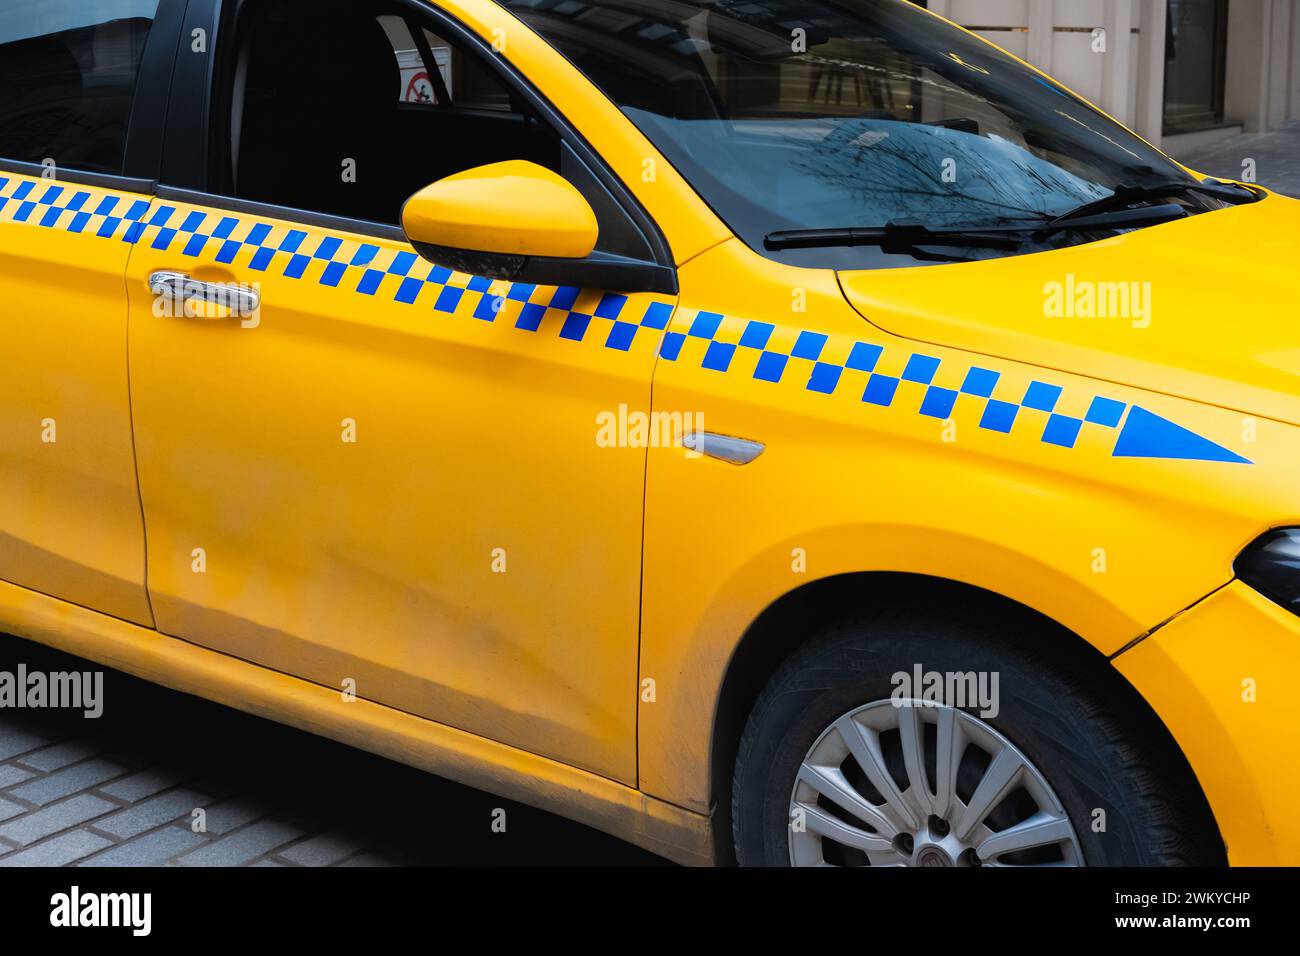 Yellow Taxi Cab. Taxi car on the street of Istanbul Turkey. Turkish taxi on the way, Istanbul taxi routes are on duty. Travel photo, street view Stock Photo